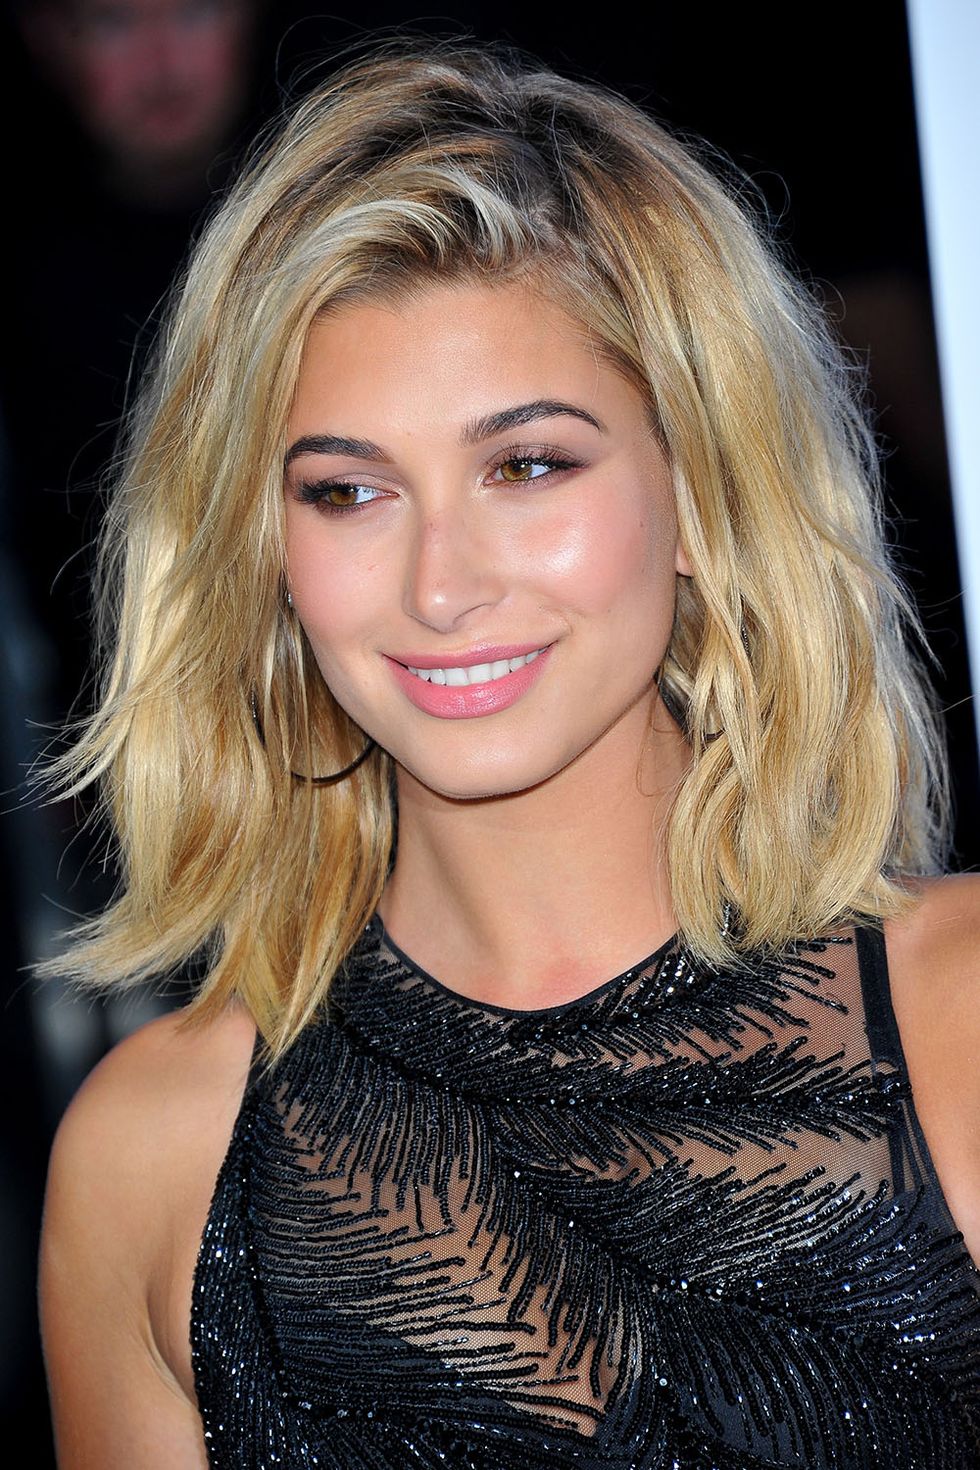 <p>Hailey Baldwin is on a '90s model hair kick. Here, her shoulder-length lob is flipped over to one side and styled in random bends.</p>